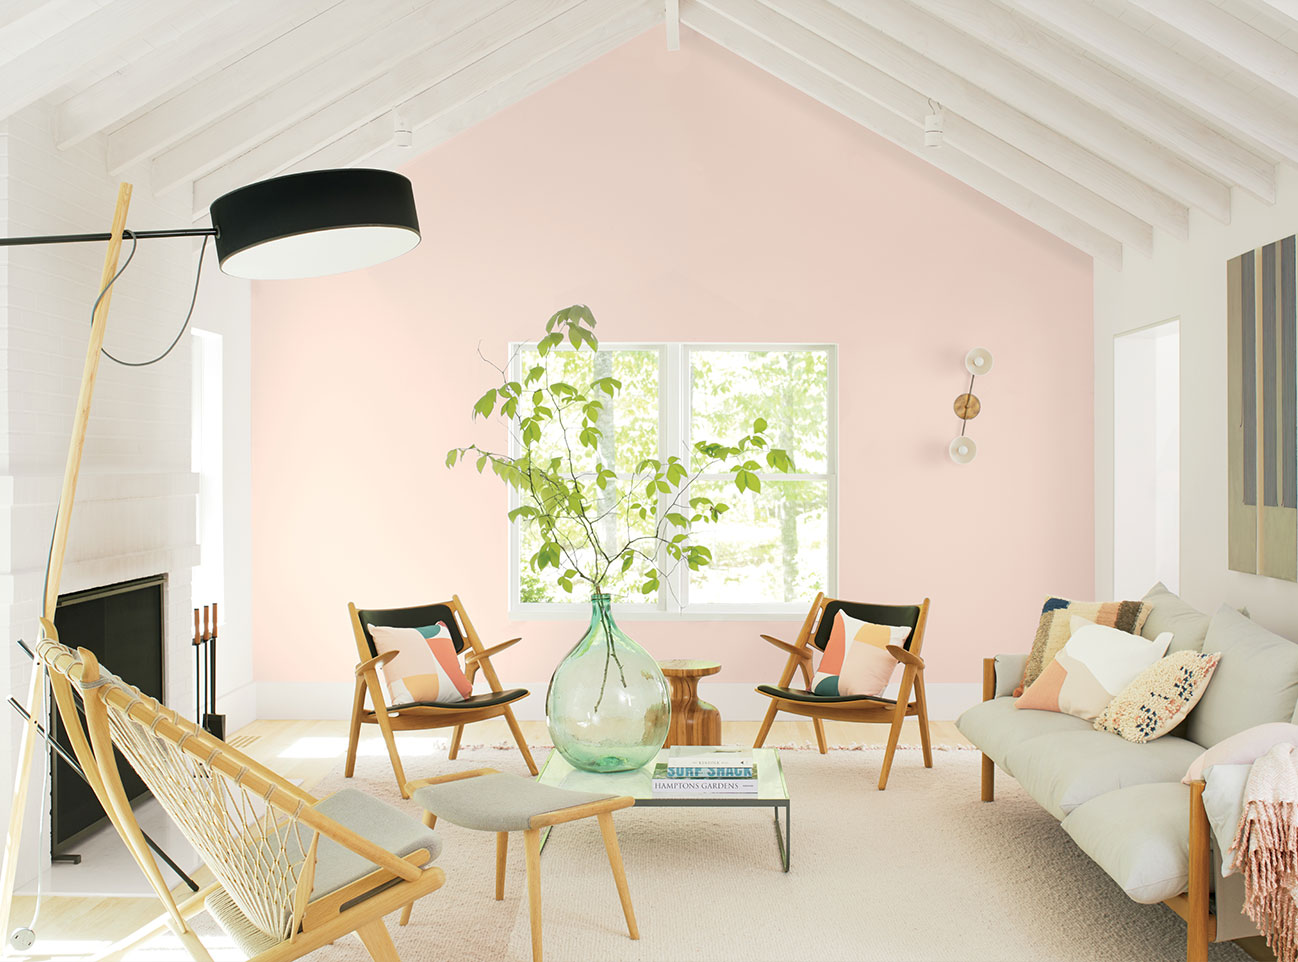 Benjamin Moore Colour of the Year 2020